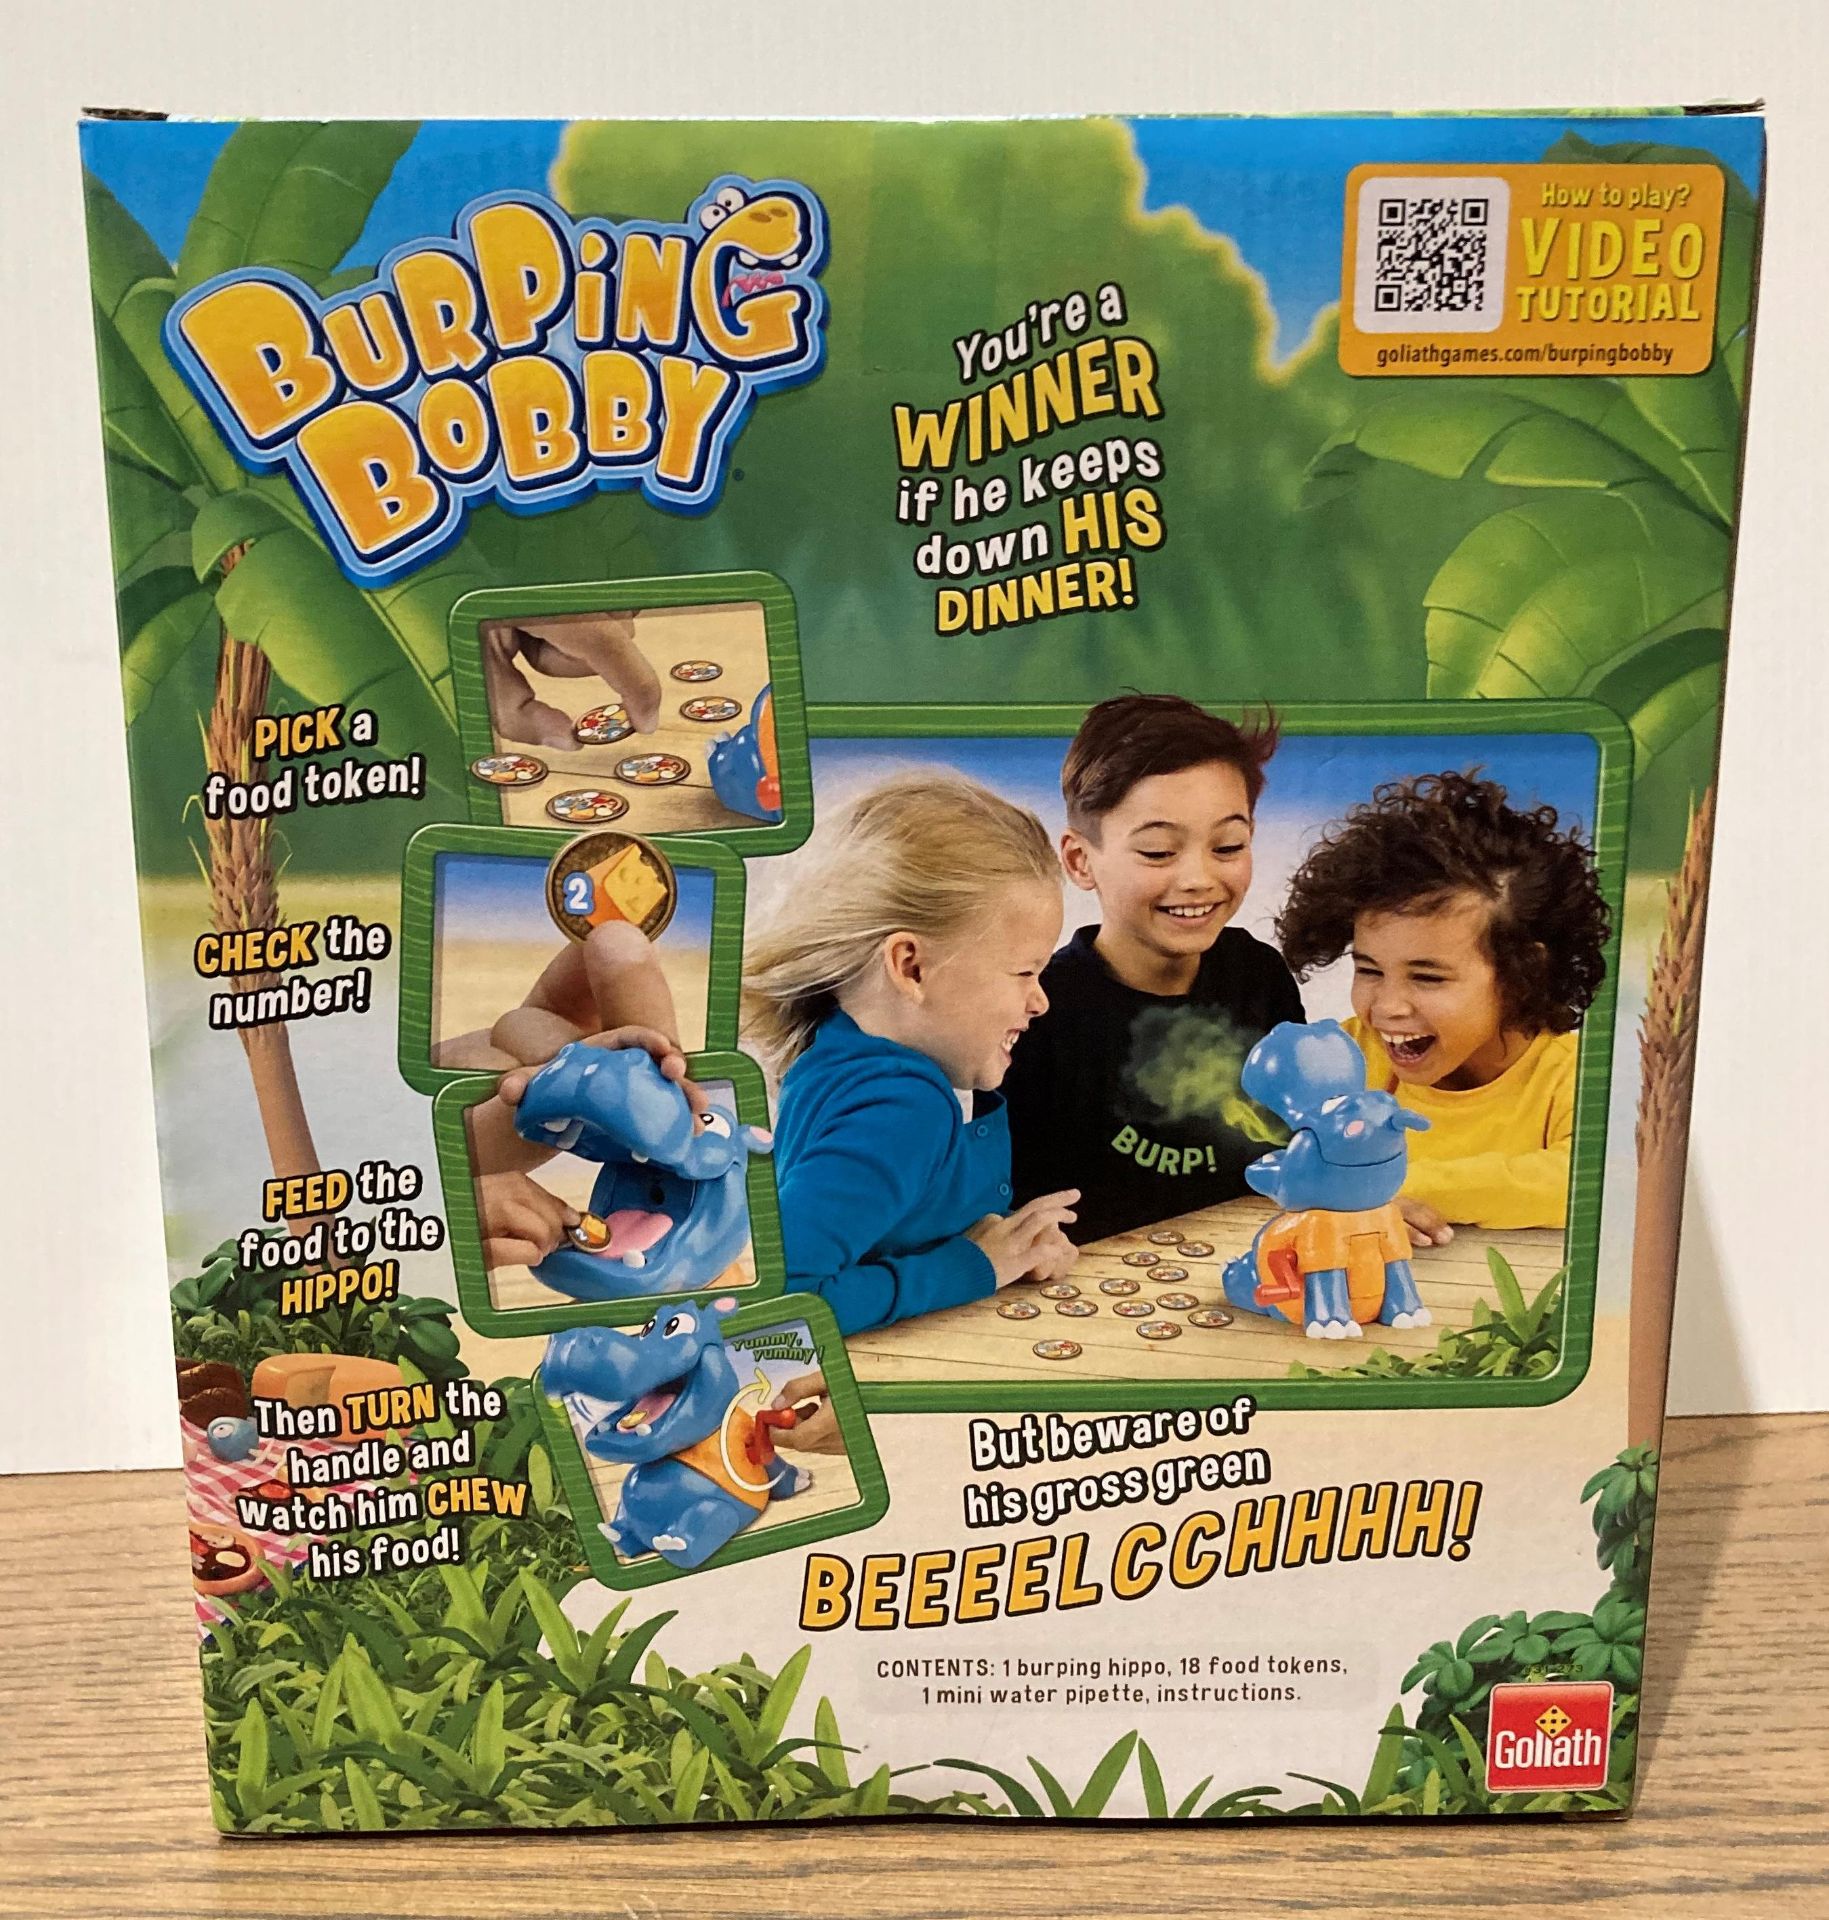 12 x Burping Bobby games RRP £23 each (2 x outer boxes) (saleroom location: end D/E aisle) - Image 2 of 4